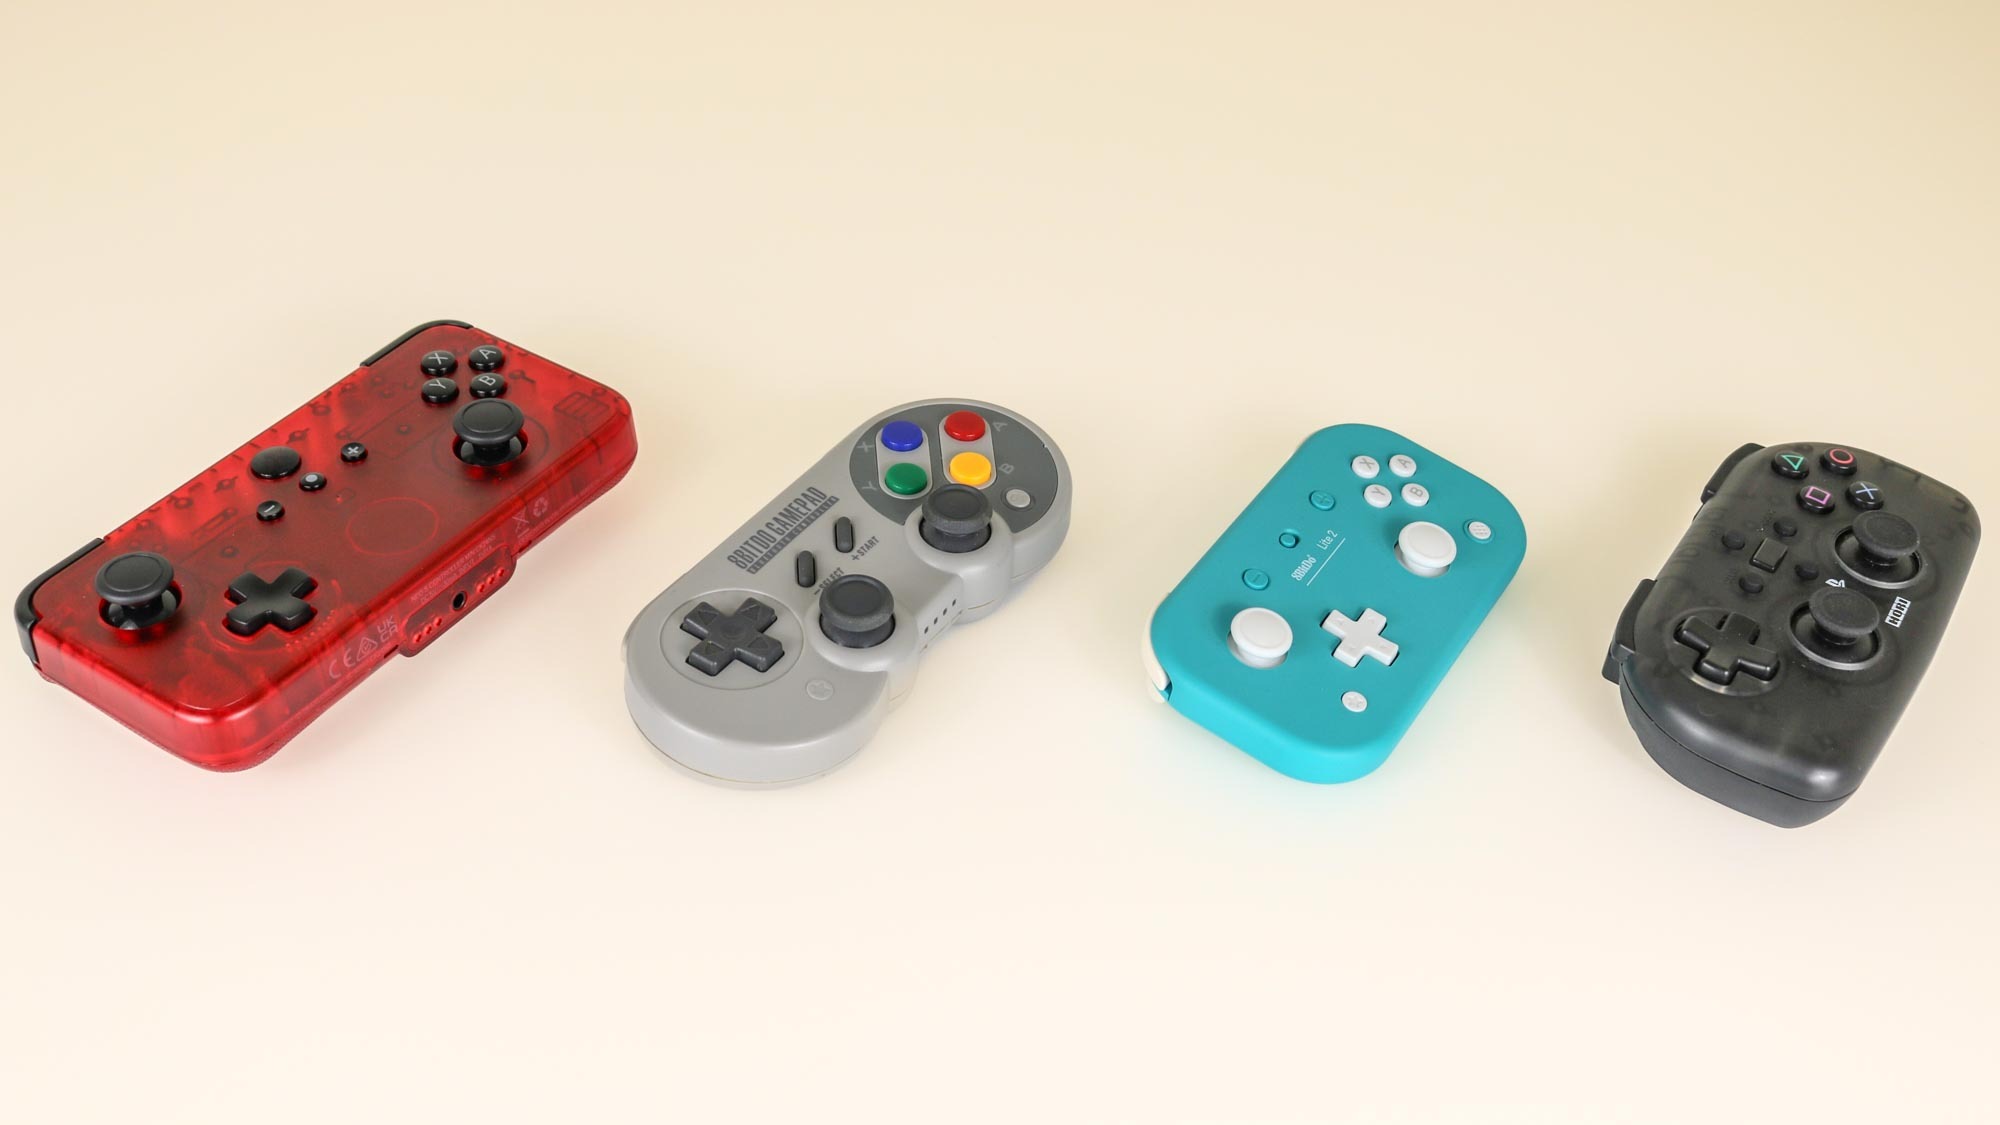 The CRKD NEO S controller on a desk alongside other gamepad-style controllers